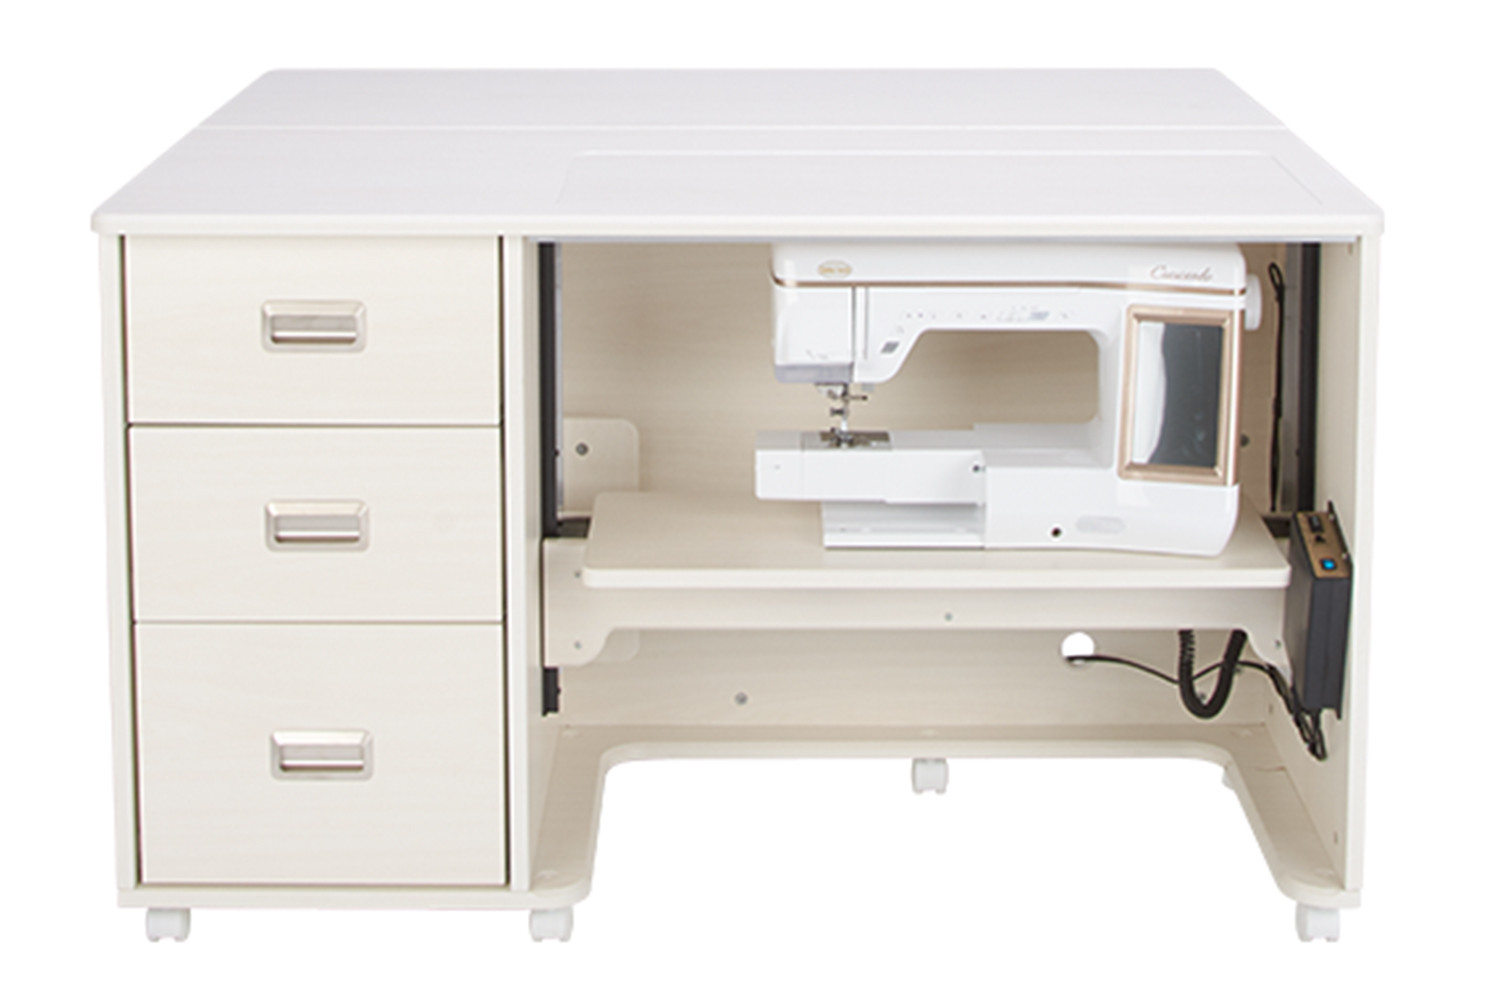 Artistry Drawer Center - clipped-2.20210222150023519